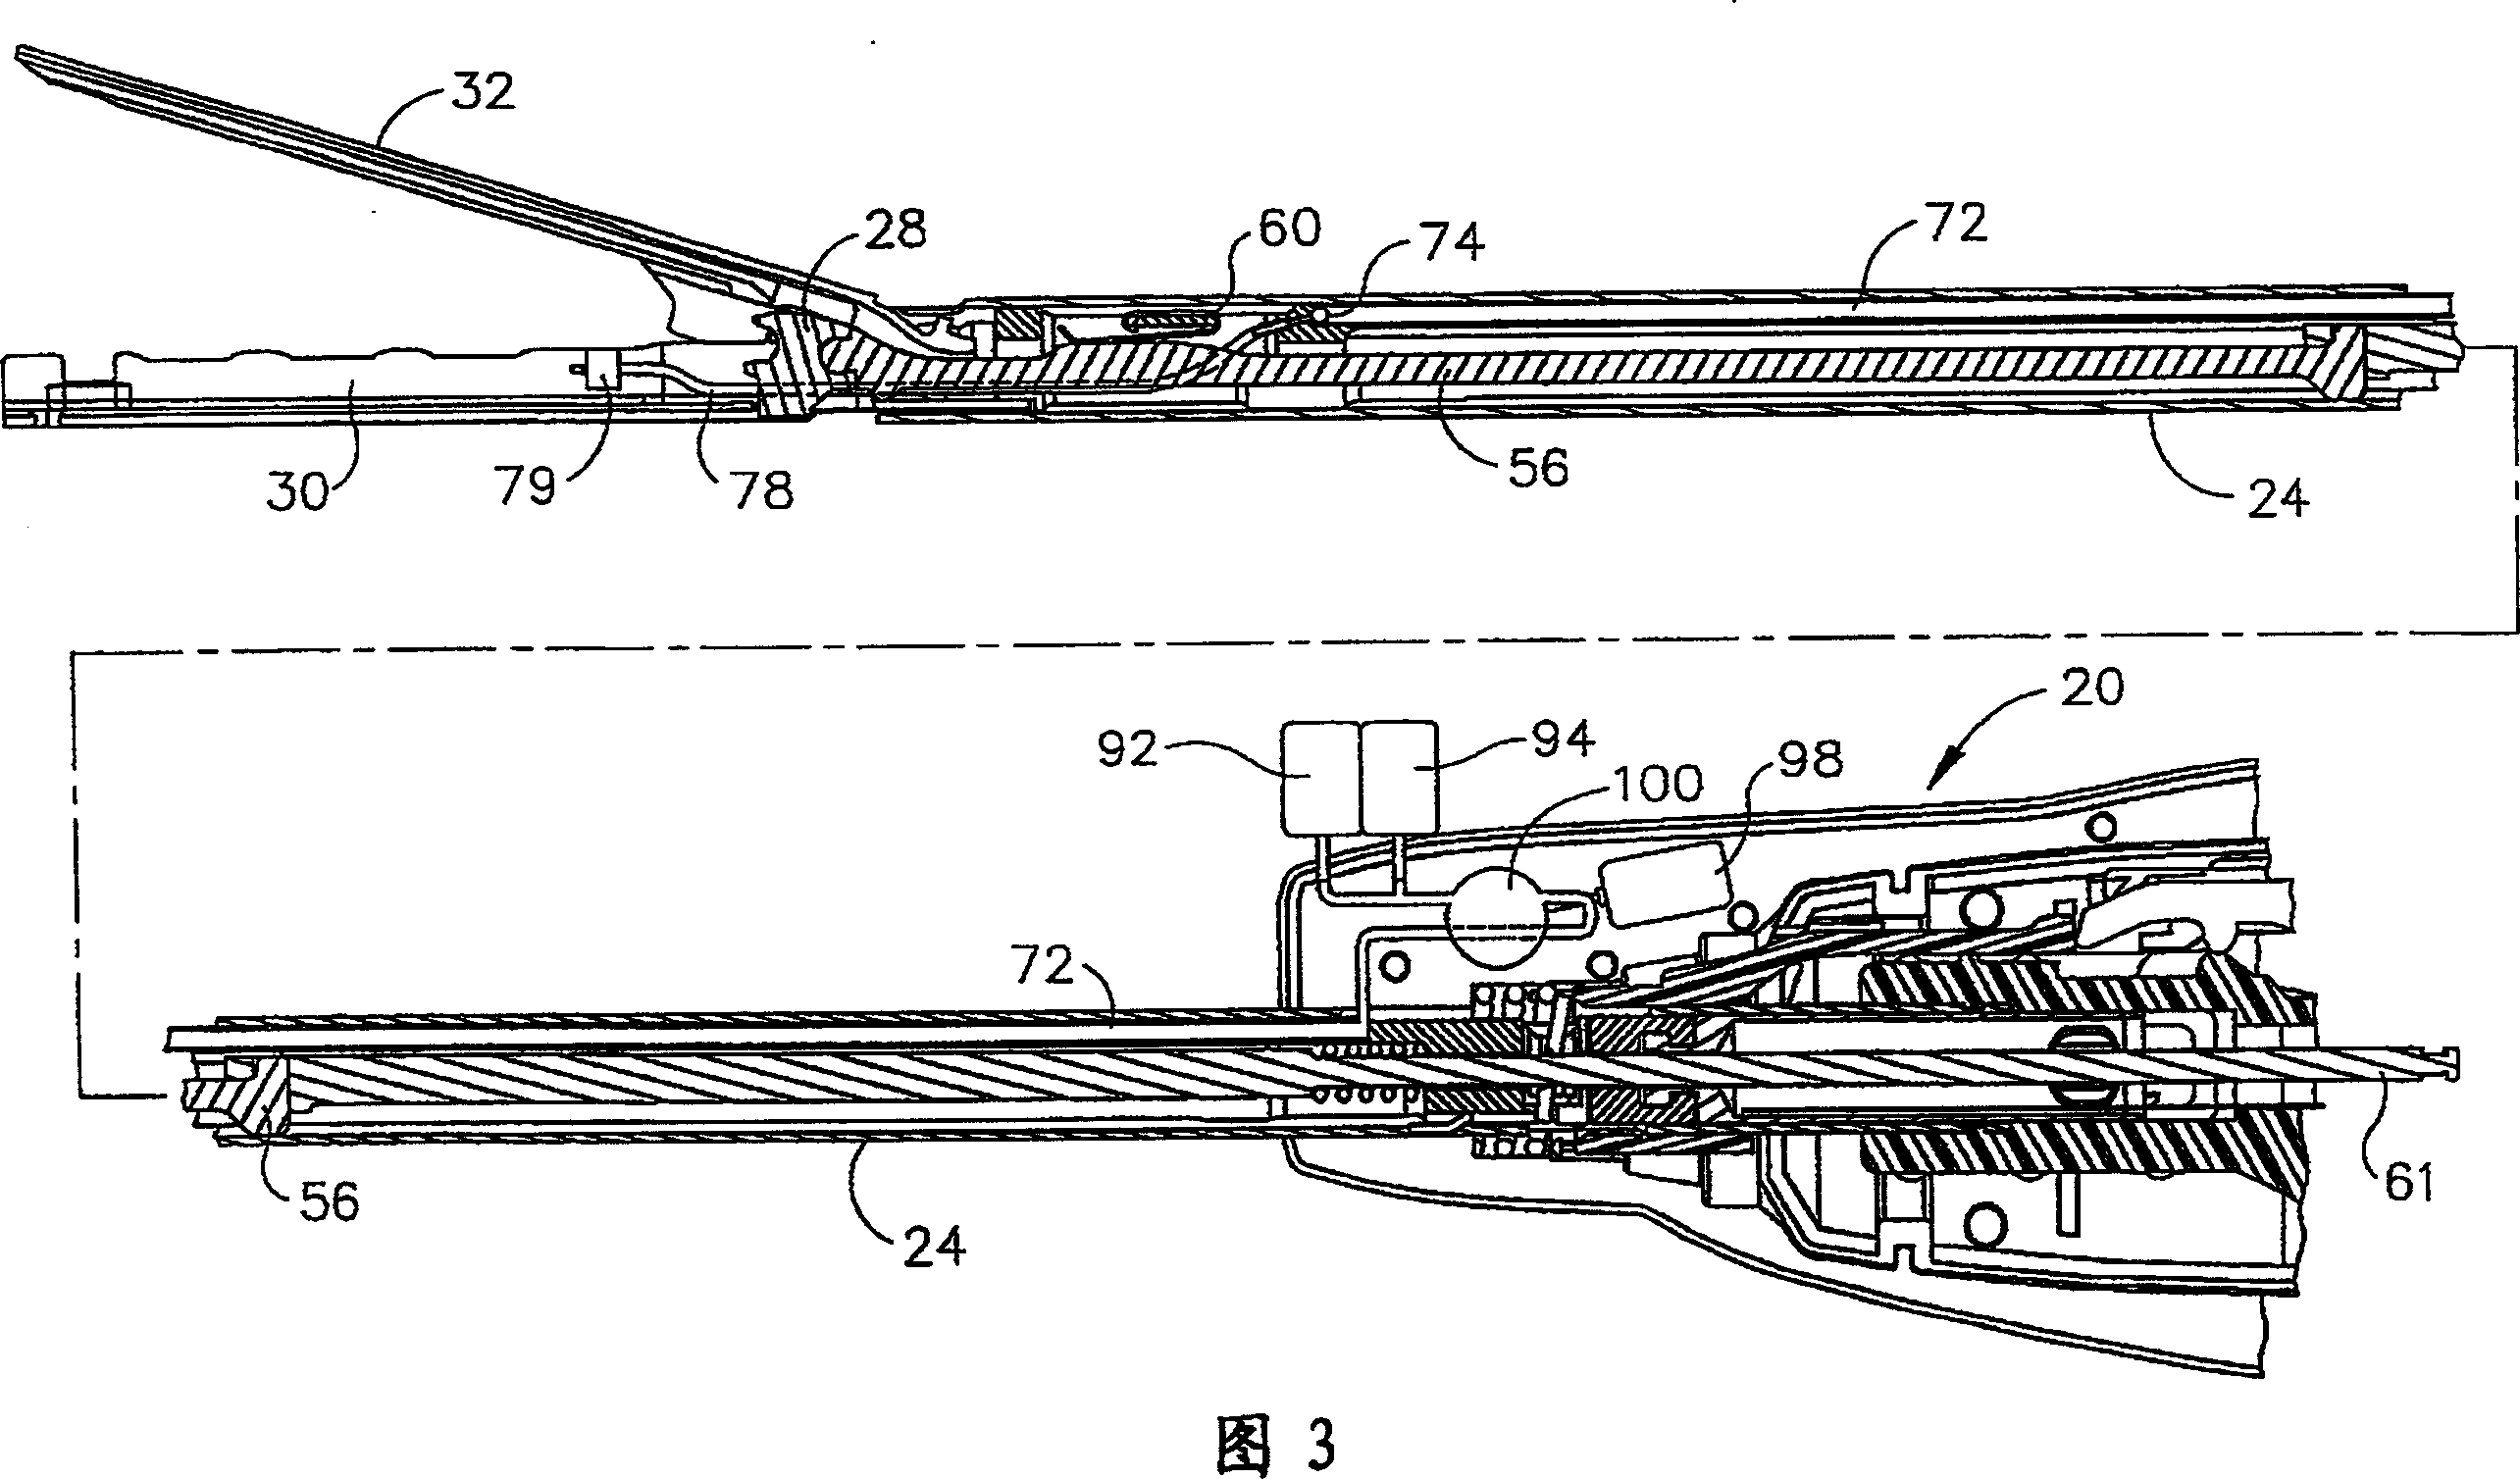 Surgical stapling instruments structured for pump-assisted delivery of medical agents